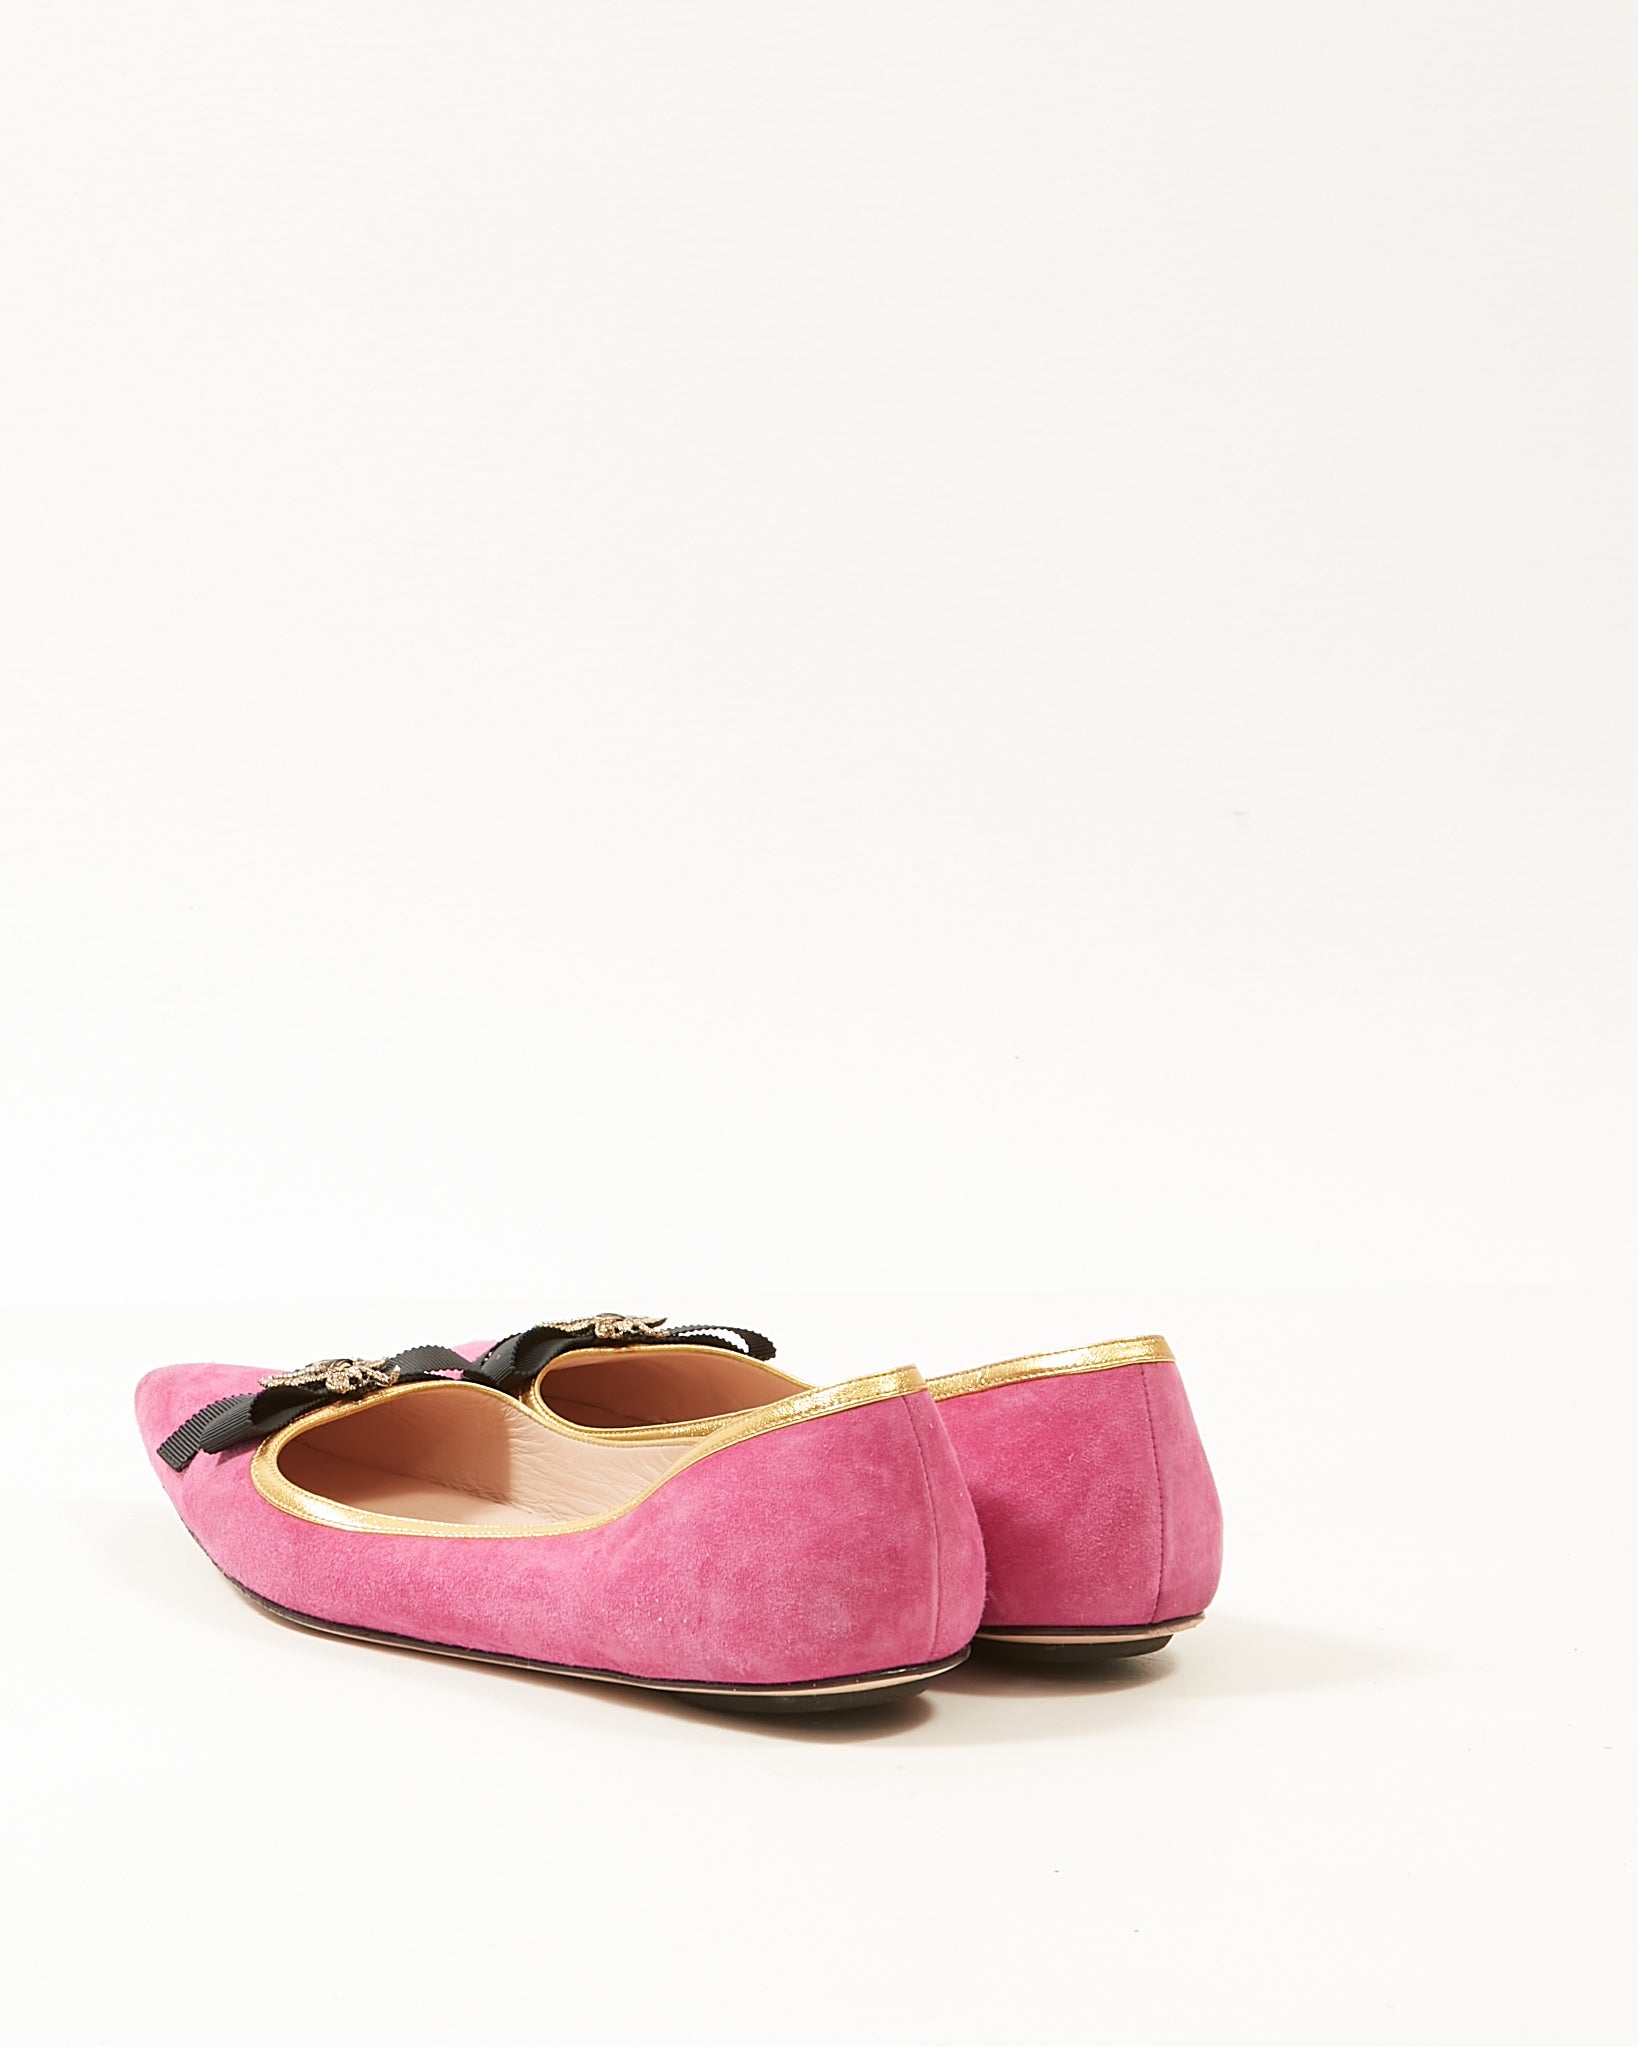 Gucci Pink Suede Embroidered Bee Gold Trim Flats - 39.5